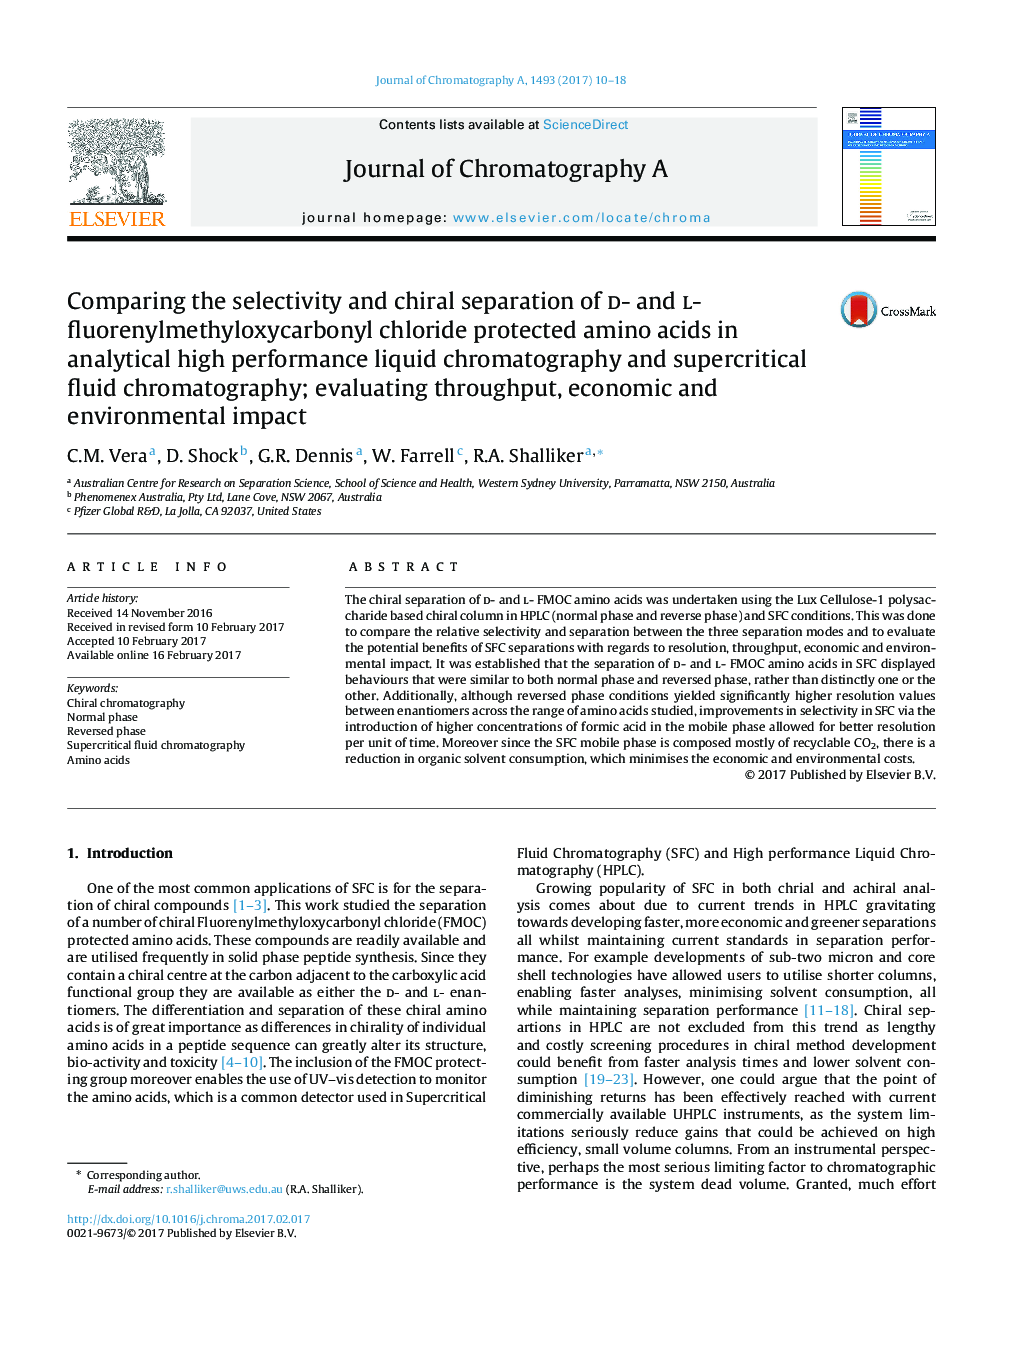 Comparing the selectivity and chiral separation of d- and l- fluorenylmethyloxycarbonyl chloride protected amino acids in analytical high performance liquid chromatography and supercritical fluid chromatography; evaluating throughput, economic and environ